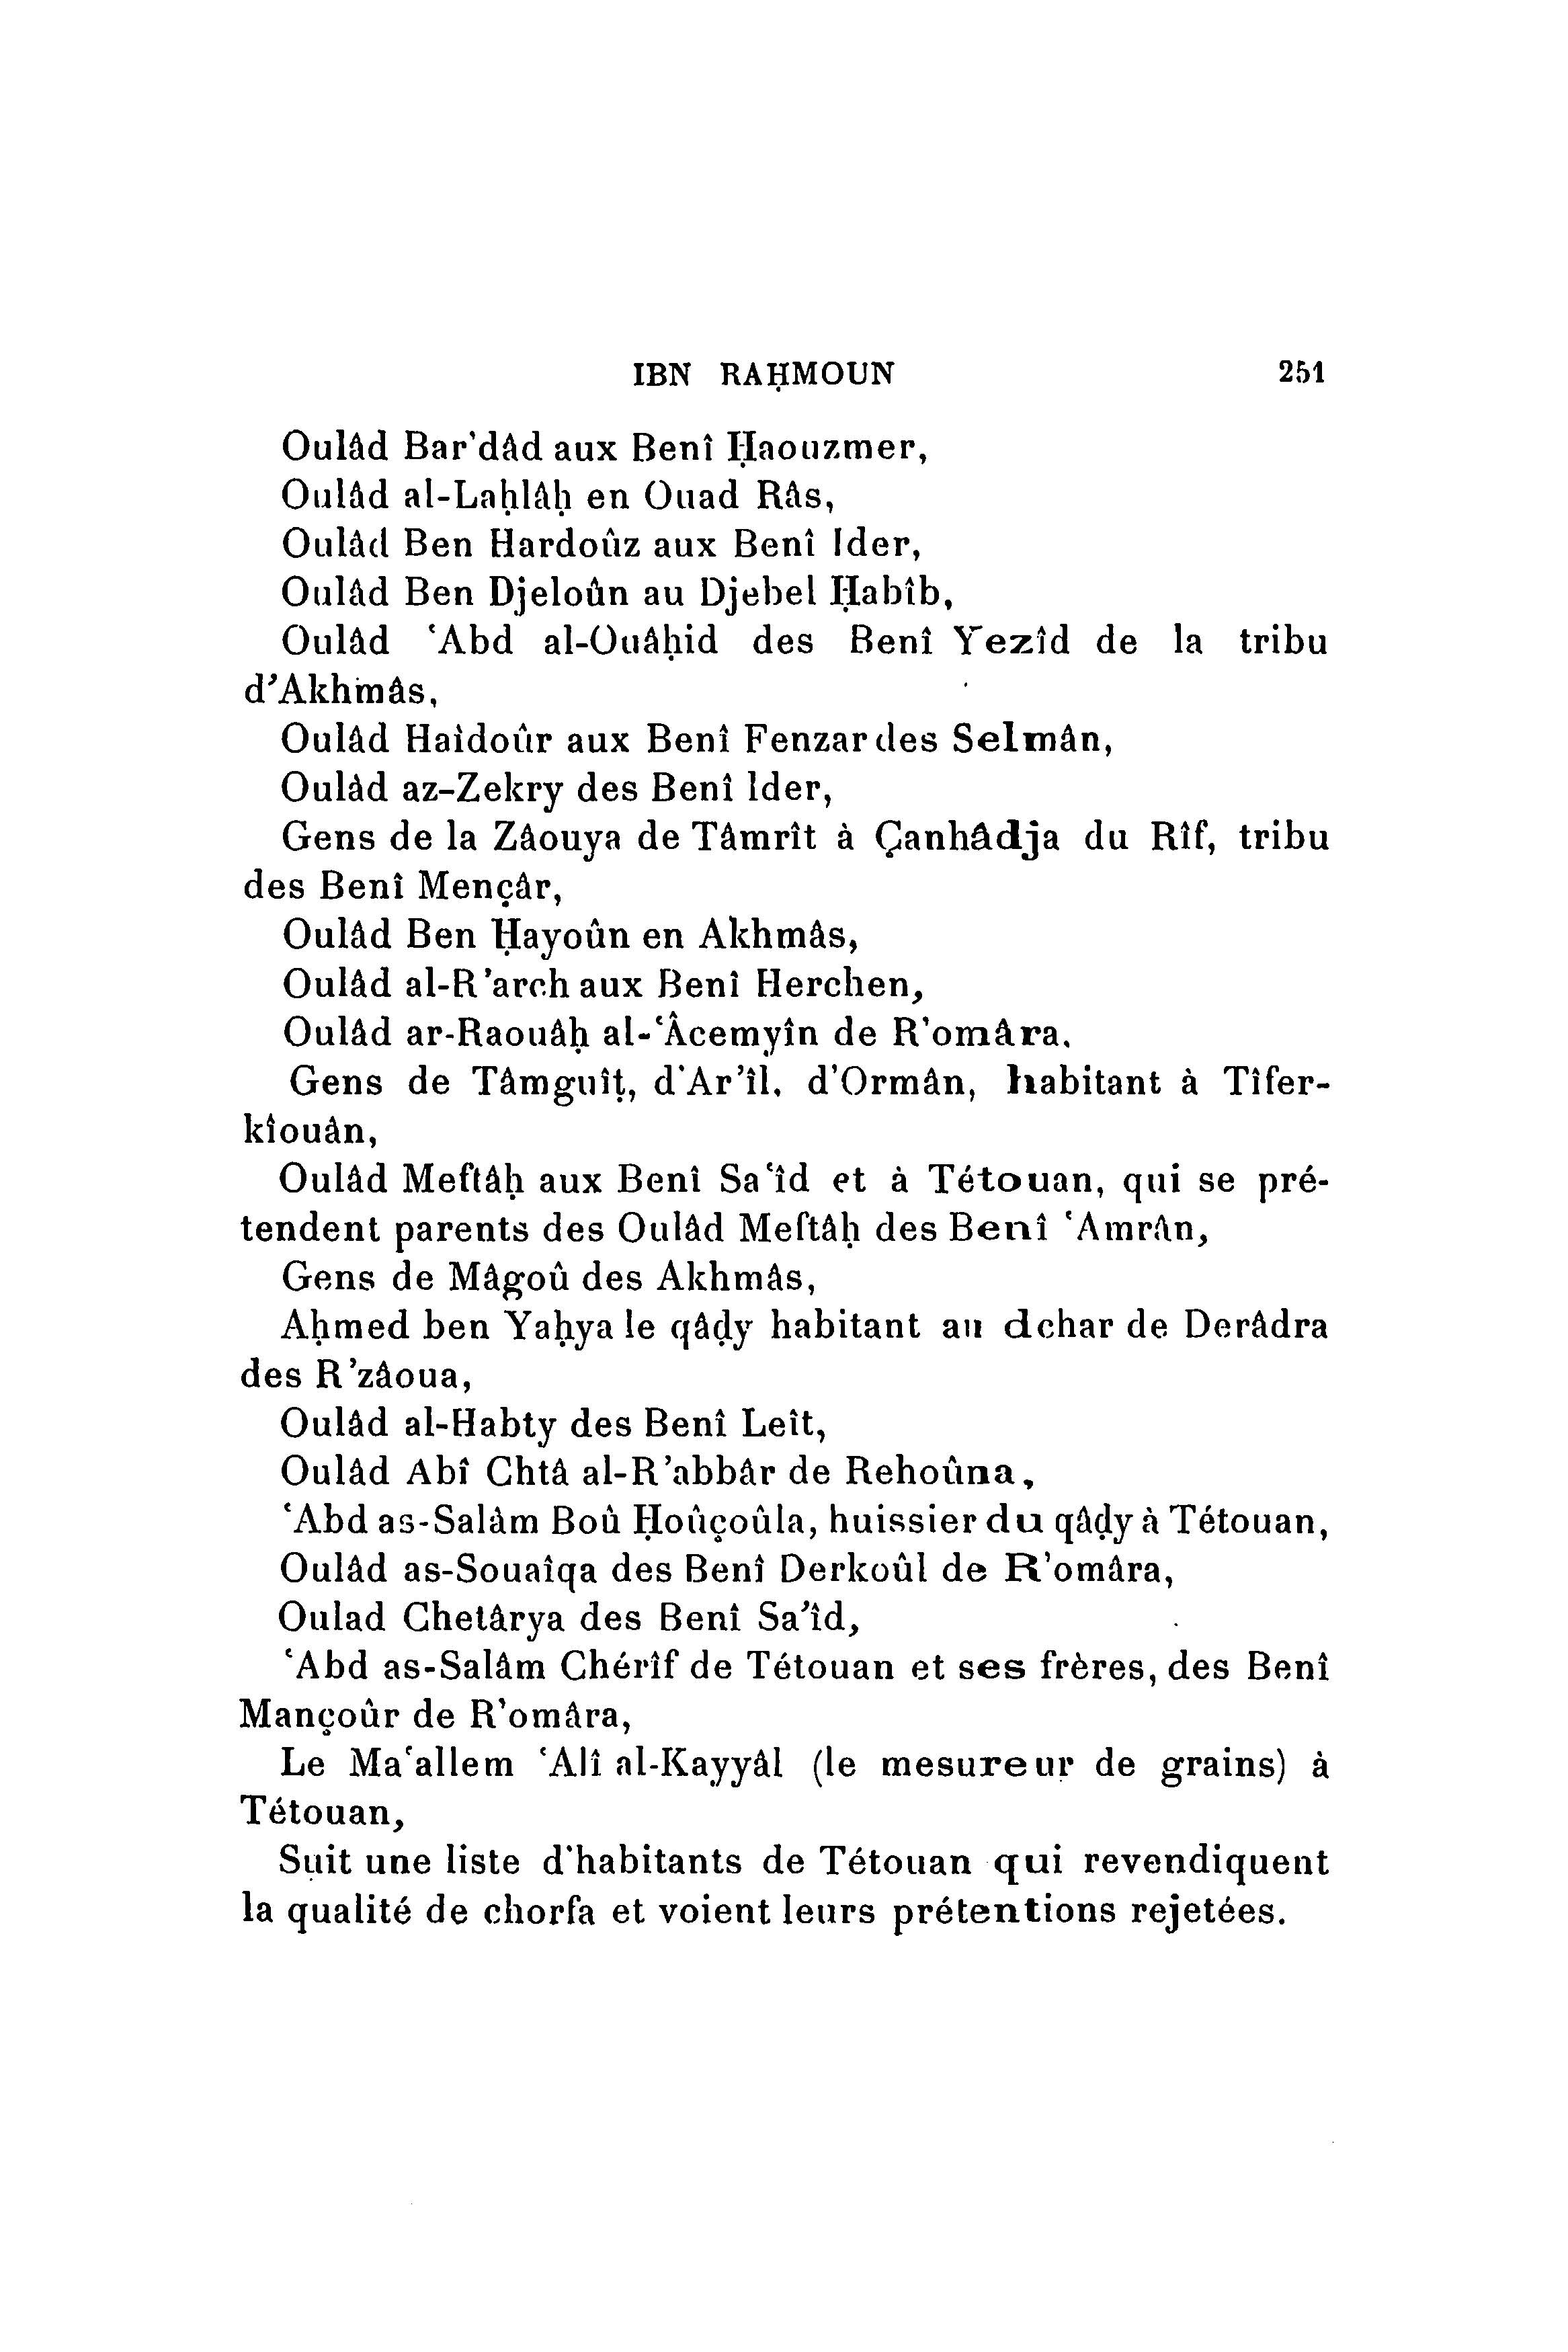 archives-marocaines-volume-03-1905_page_259